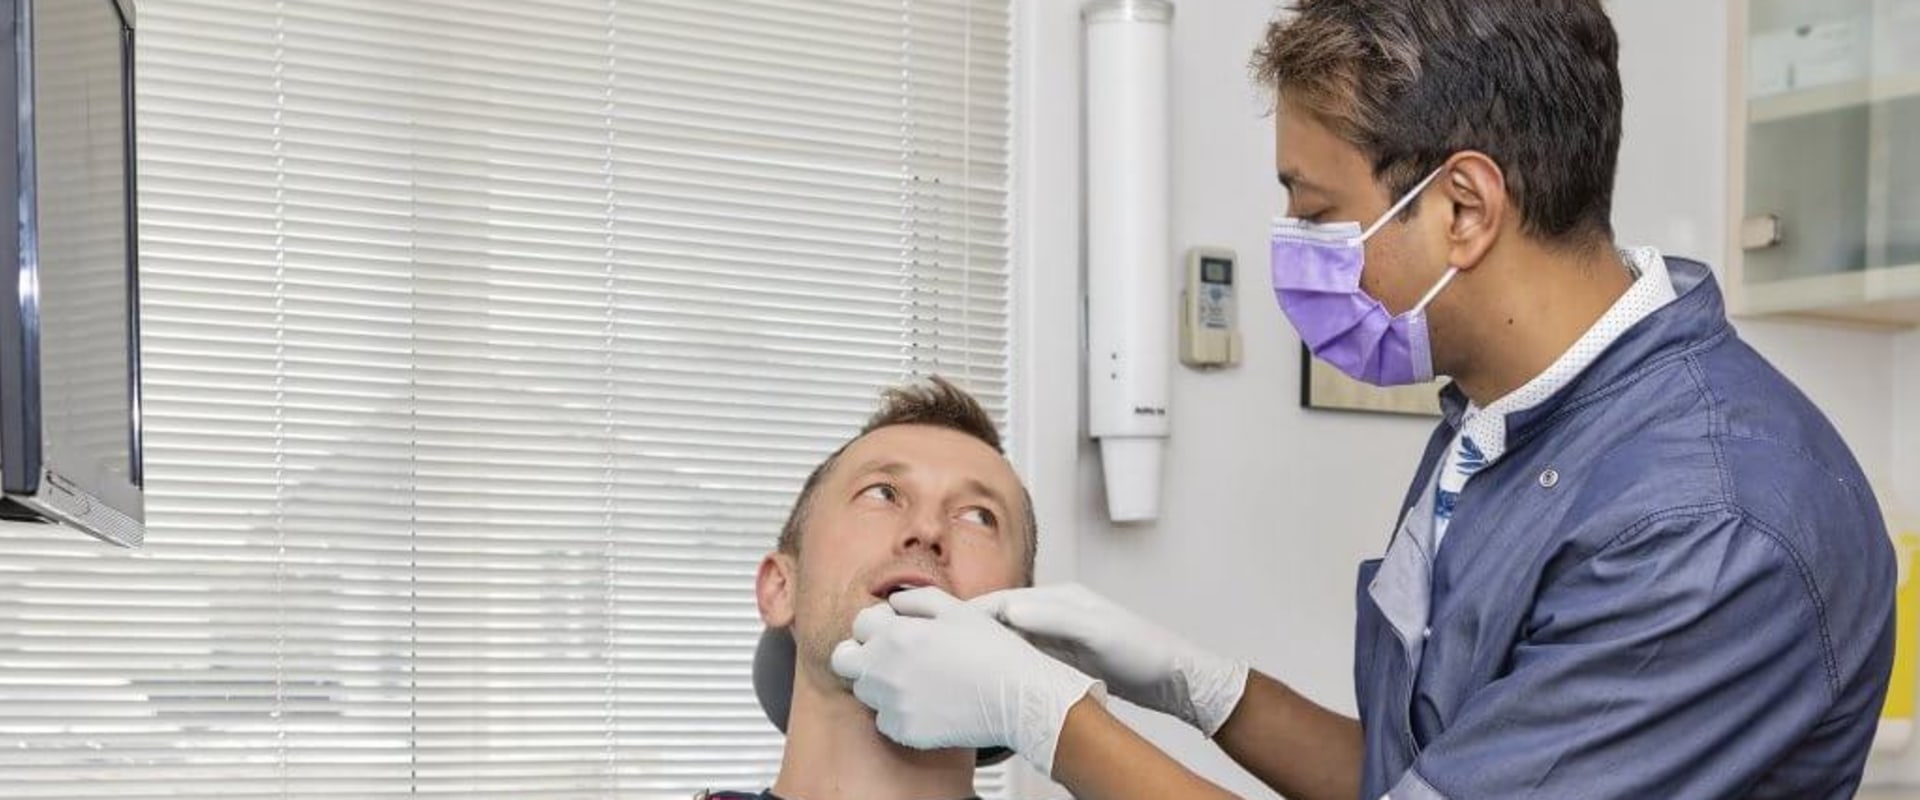 The Benefits of Visiting the Dentist Every 6 Months